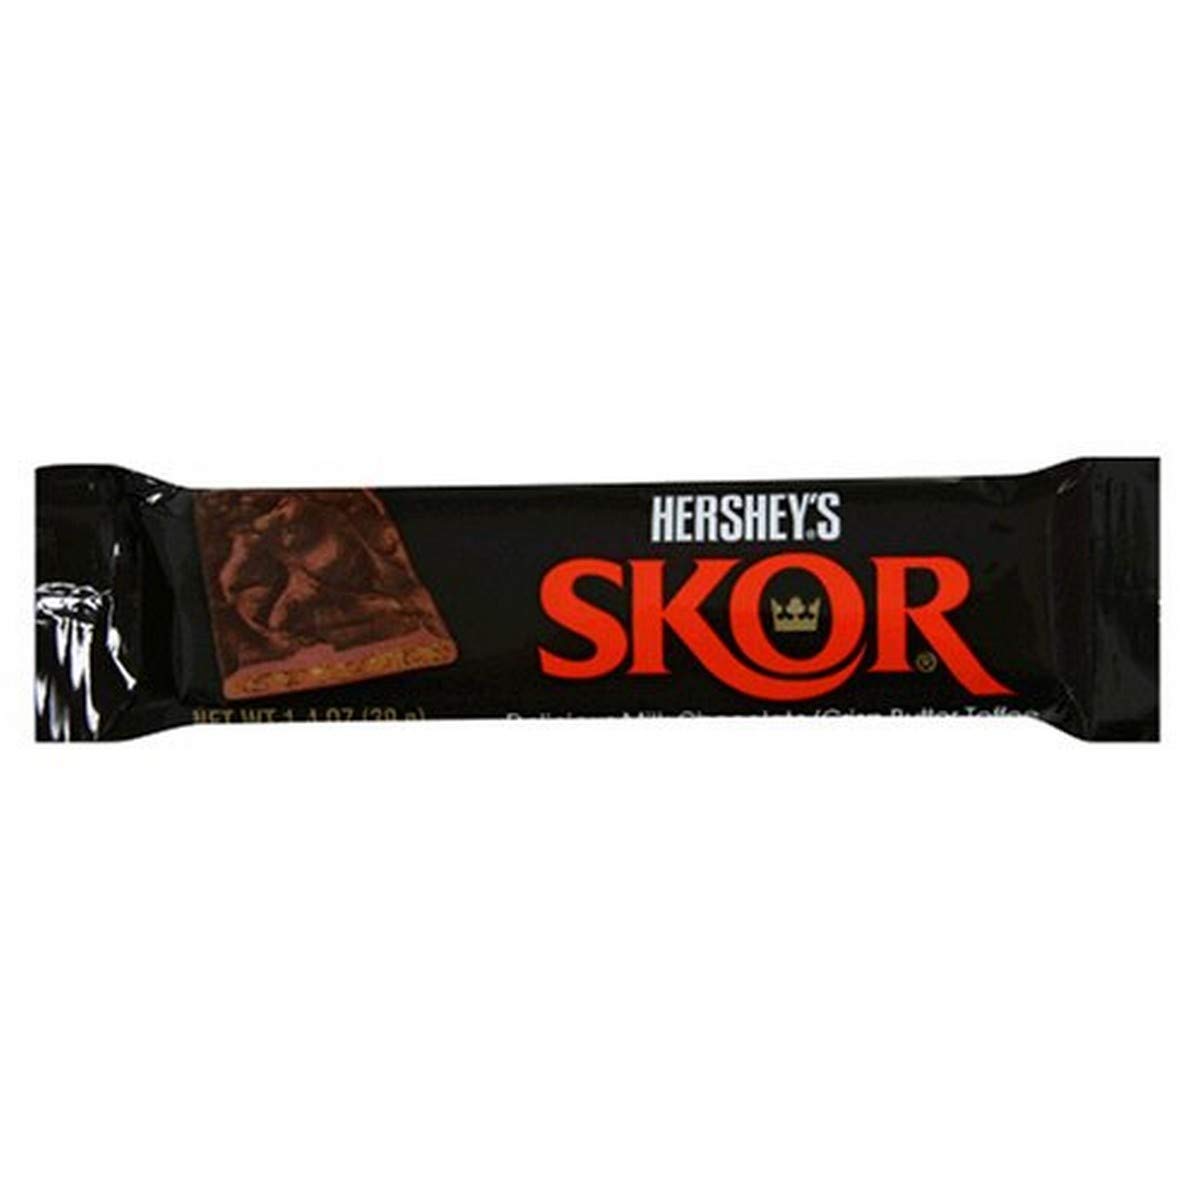 18-Ct 1.4-Oz Hershey's Skor Milk Chocolate Crisp Butter Toffee Candy Bars $12.73 + free shipping w/ Prime or on $25+